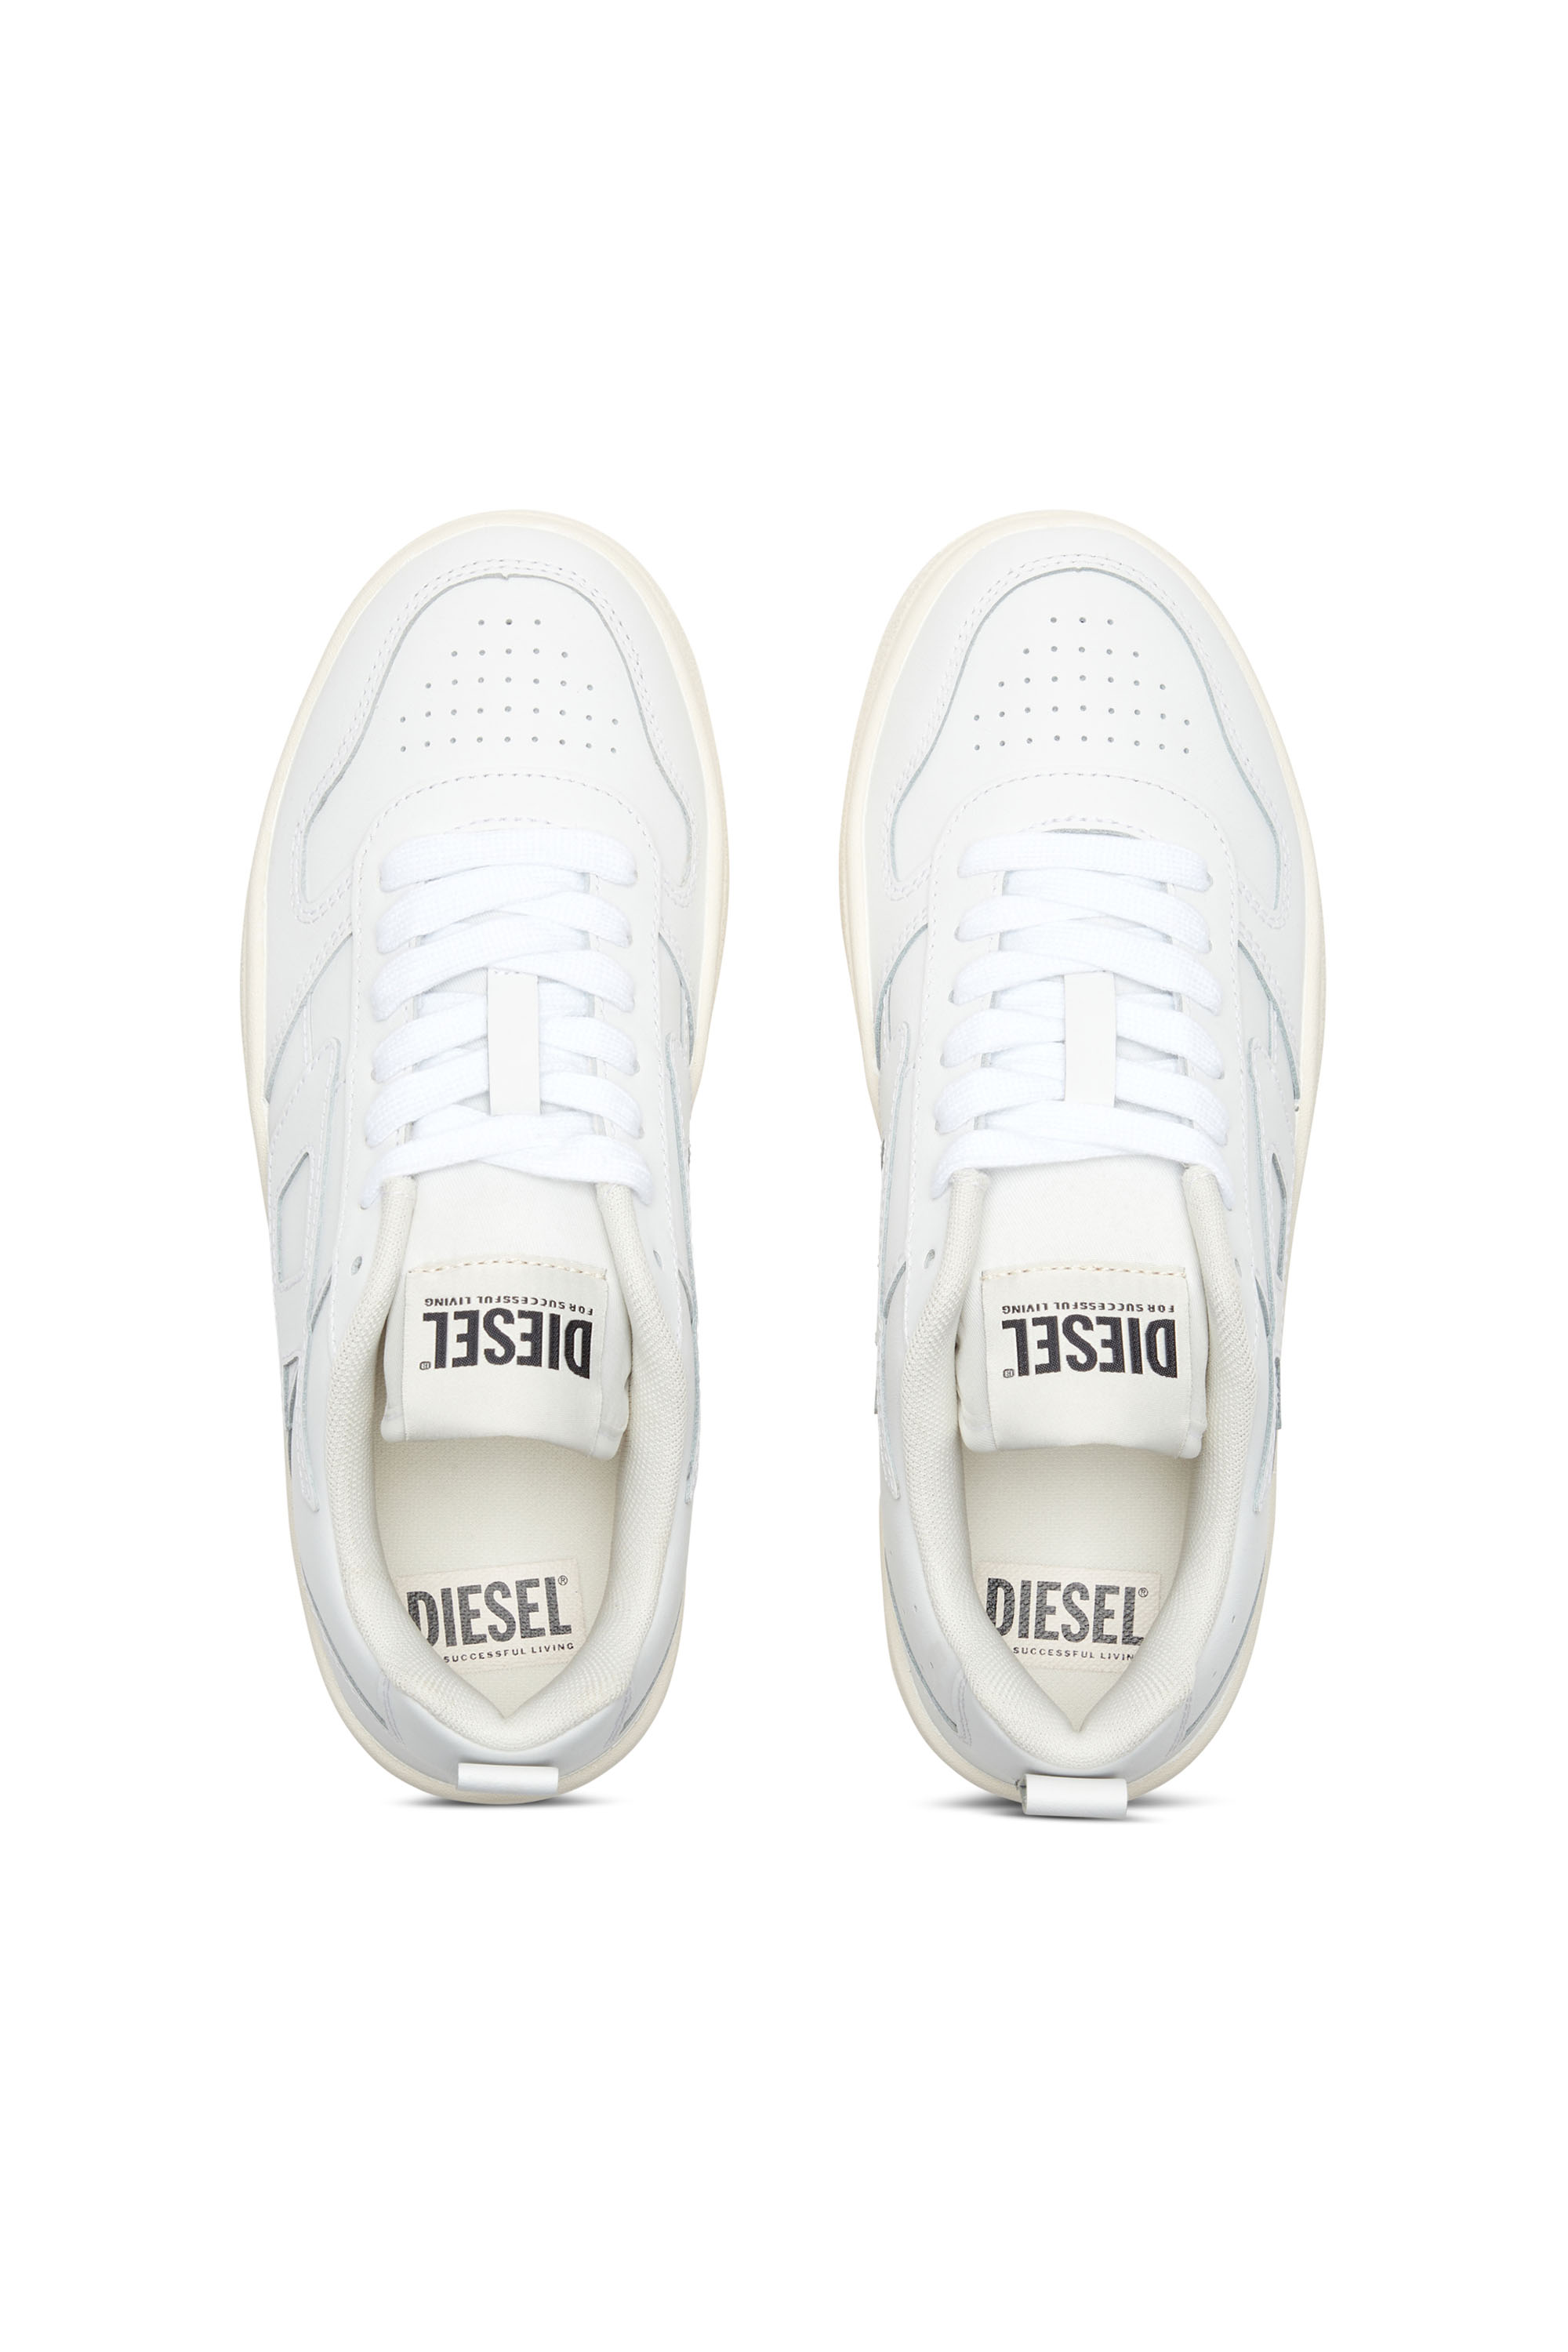 Diesel - S-UKIYO V2 LOW, Man S-Ukiyo Low-Low-top sneakers in leather and nylon in White - Image 5